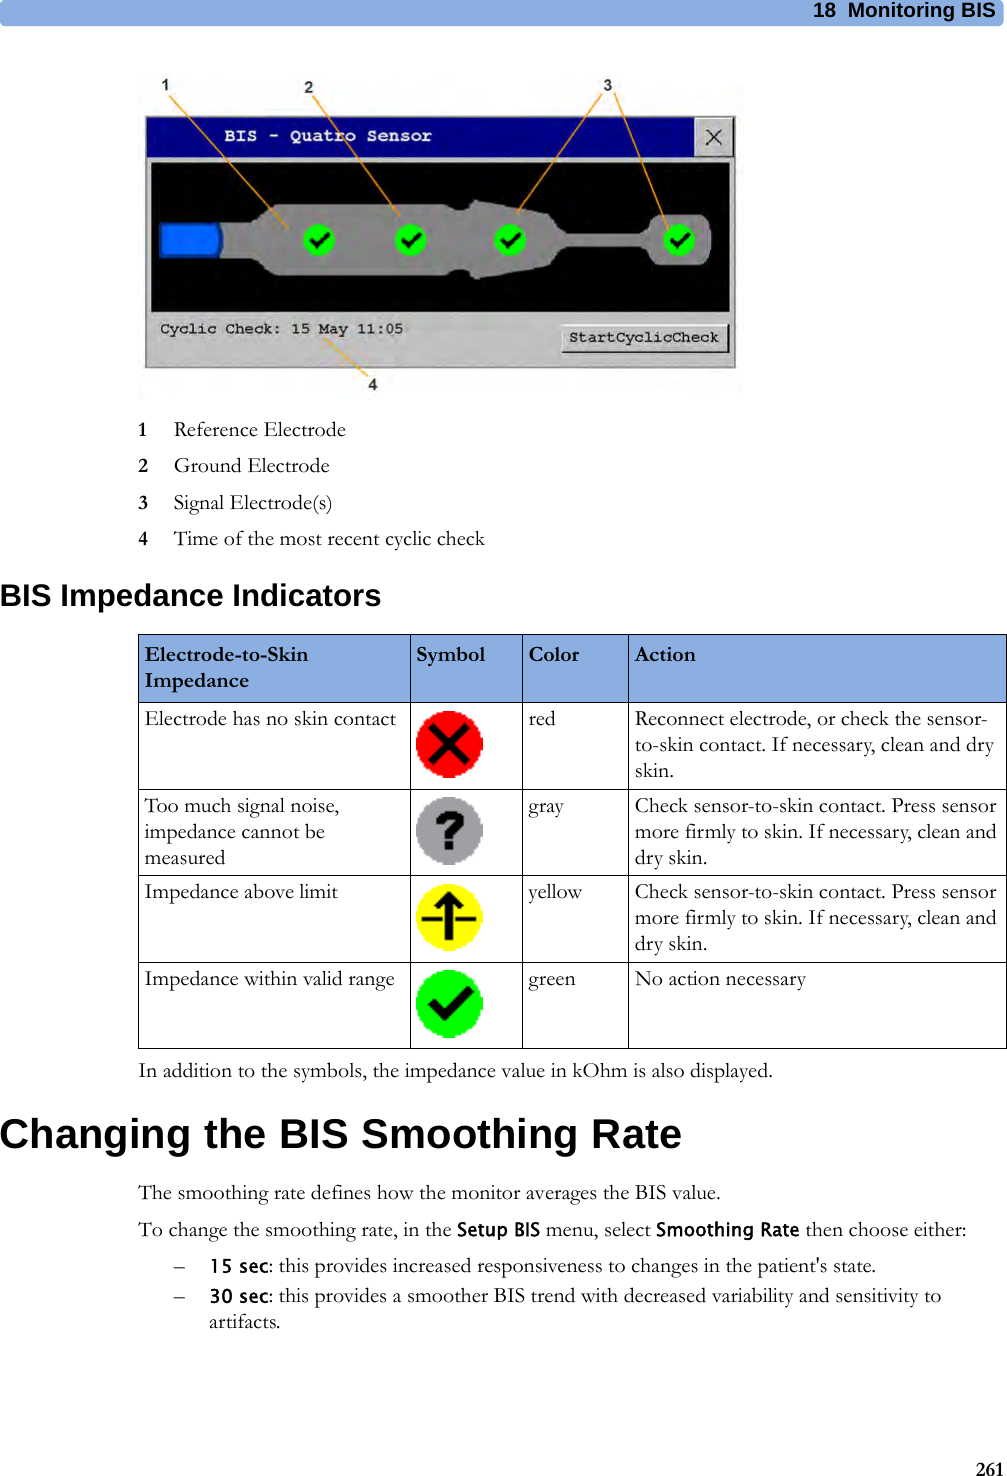 18 Monitoring BIS2611Reference Electrode2Ground Electrode3Signal Electrode(s)4Time of the most recent cyclic checkBIS Impedance IndicatorsIn addition to the symbols, the impedance value in kOhm is also displayed. Changing the BIS Smoothing RateThe smoothing rate defines how the monitor averages the BIS value.To change the smoothing rate, in the Setup BIS menu, select Smoothing Rate then choose either:–15 sec: this provides increased responsiveness to changes in the patient&apos;s state.–30 sec: this provides a smoother BIS trend with decreased variability and sensitivity to artifacts.Electrode-to-Skin ImpedanceSymbol Color ActionElectrode has no skin contact red Reconnect electrode, or check the sensor-to-skin contact. If necessary, clean and dry skin.Too much signal noise, impedance cannot be measuredgray Check sensor-to-skin contact. Press sensor more firmly to skin. If necessary, clean and dry skin.Impedance above limit yellow Check sensor-to-skin contact. Press sensor more firmly to skin. If necessary, clean and dry skin.Impedance within valid range green No action necessary